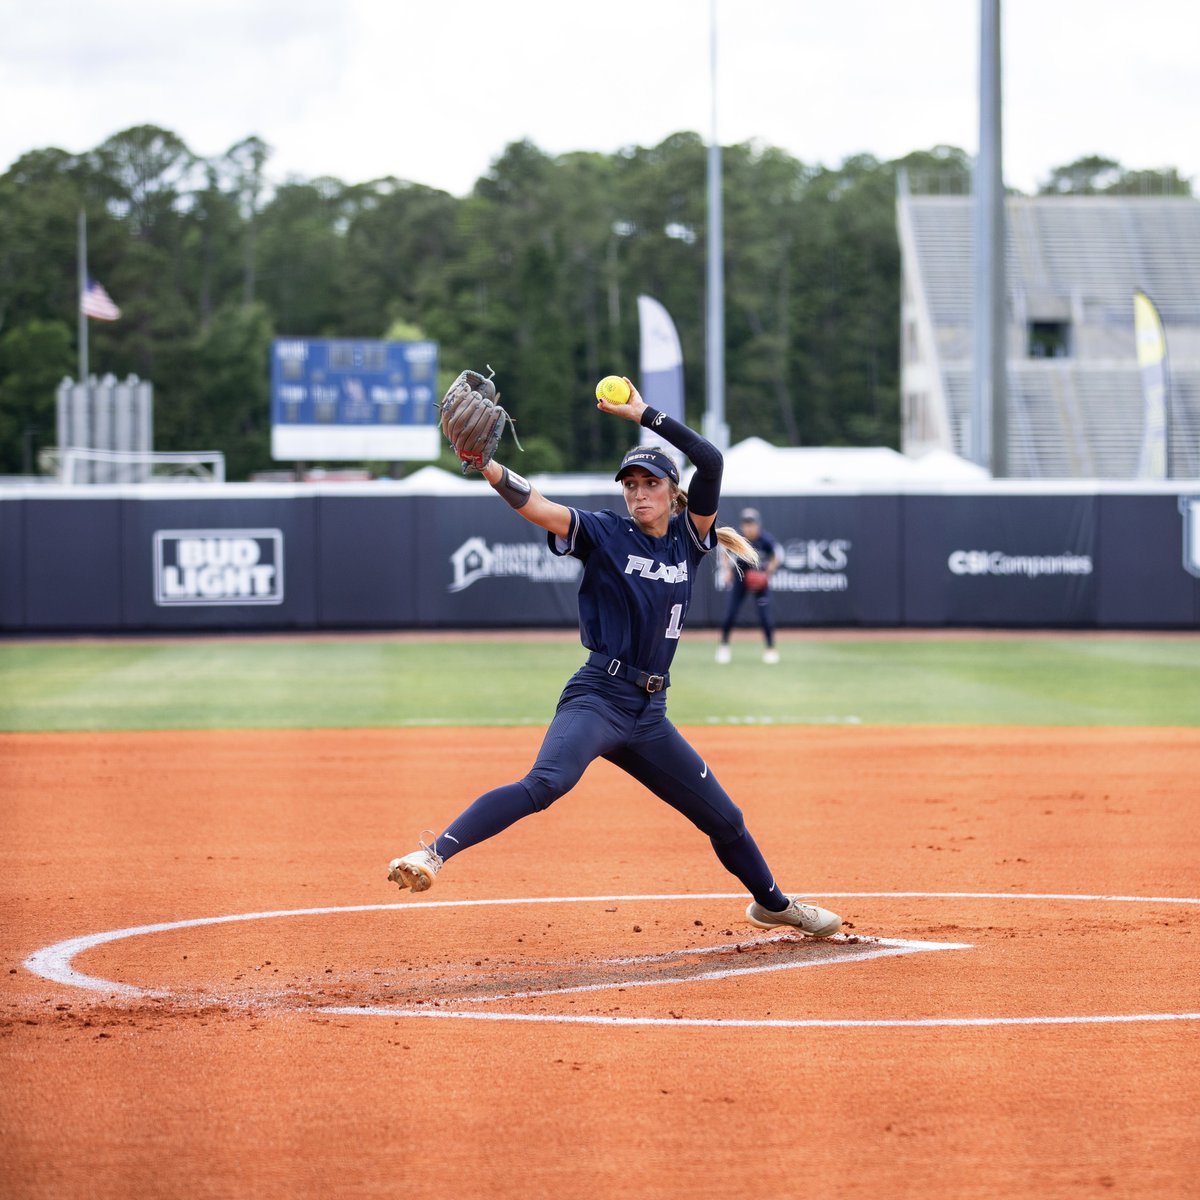 Our October Youth Pitching Clinic is only 5️⃣ days away! 🗓️ October 15 ⏰ 10 a.m. - 12 p.m. 🥎 Grades 2nd - 5th Sign up here: LibertySoftballCamps.com